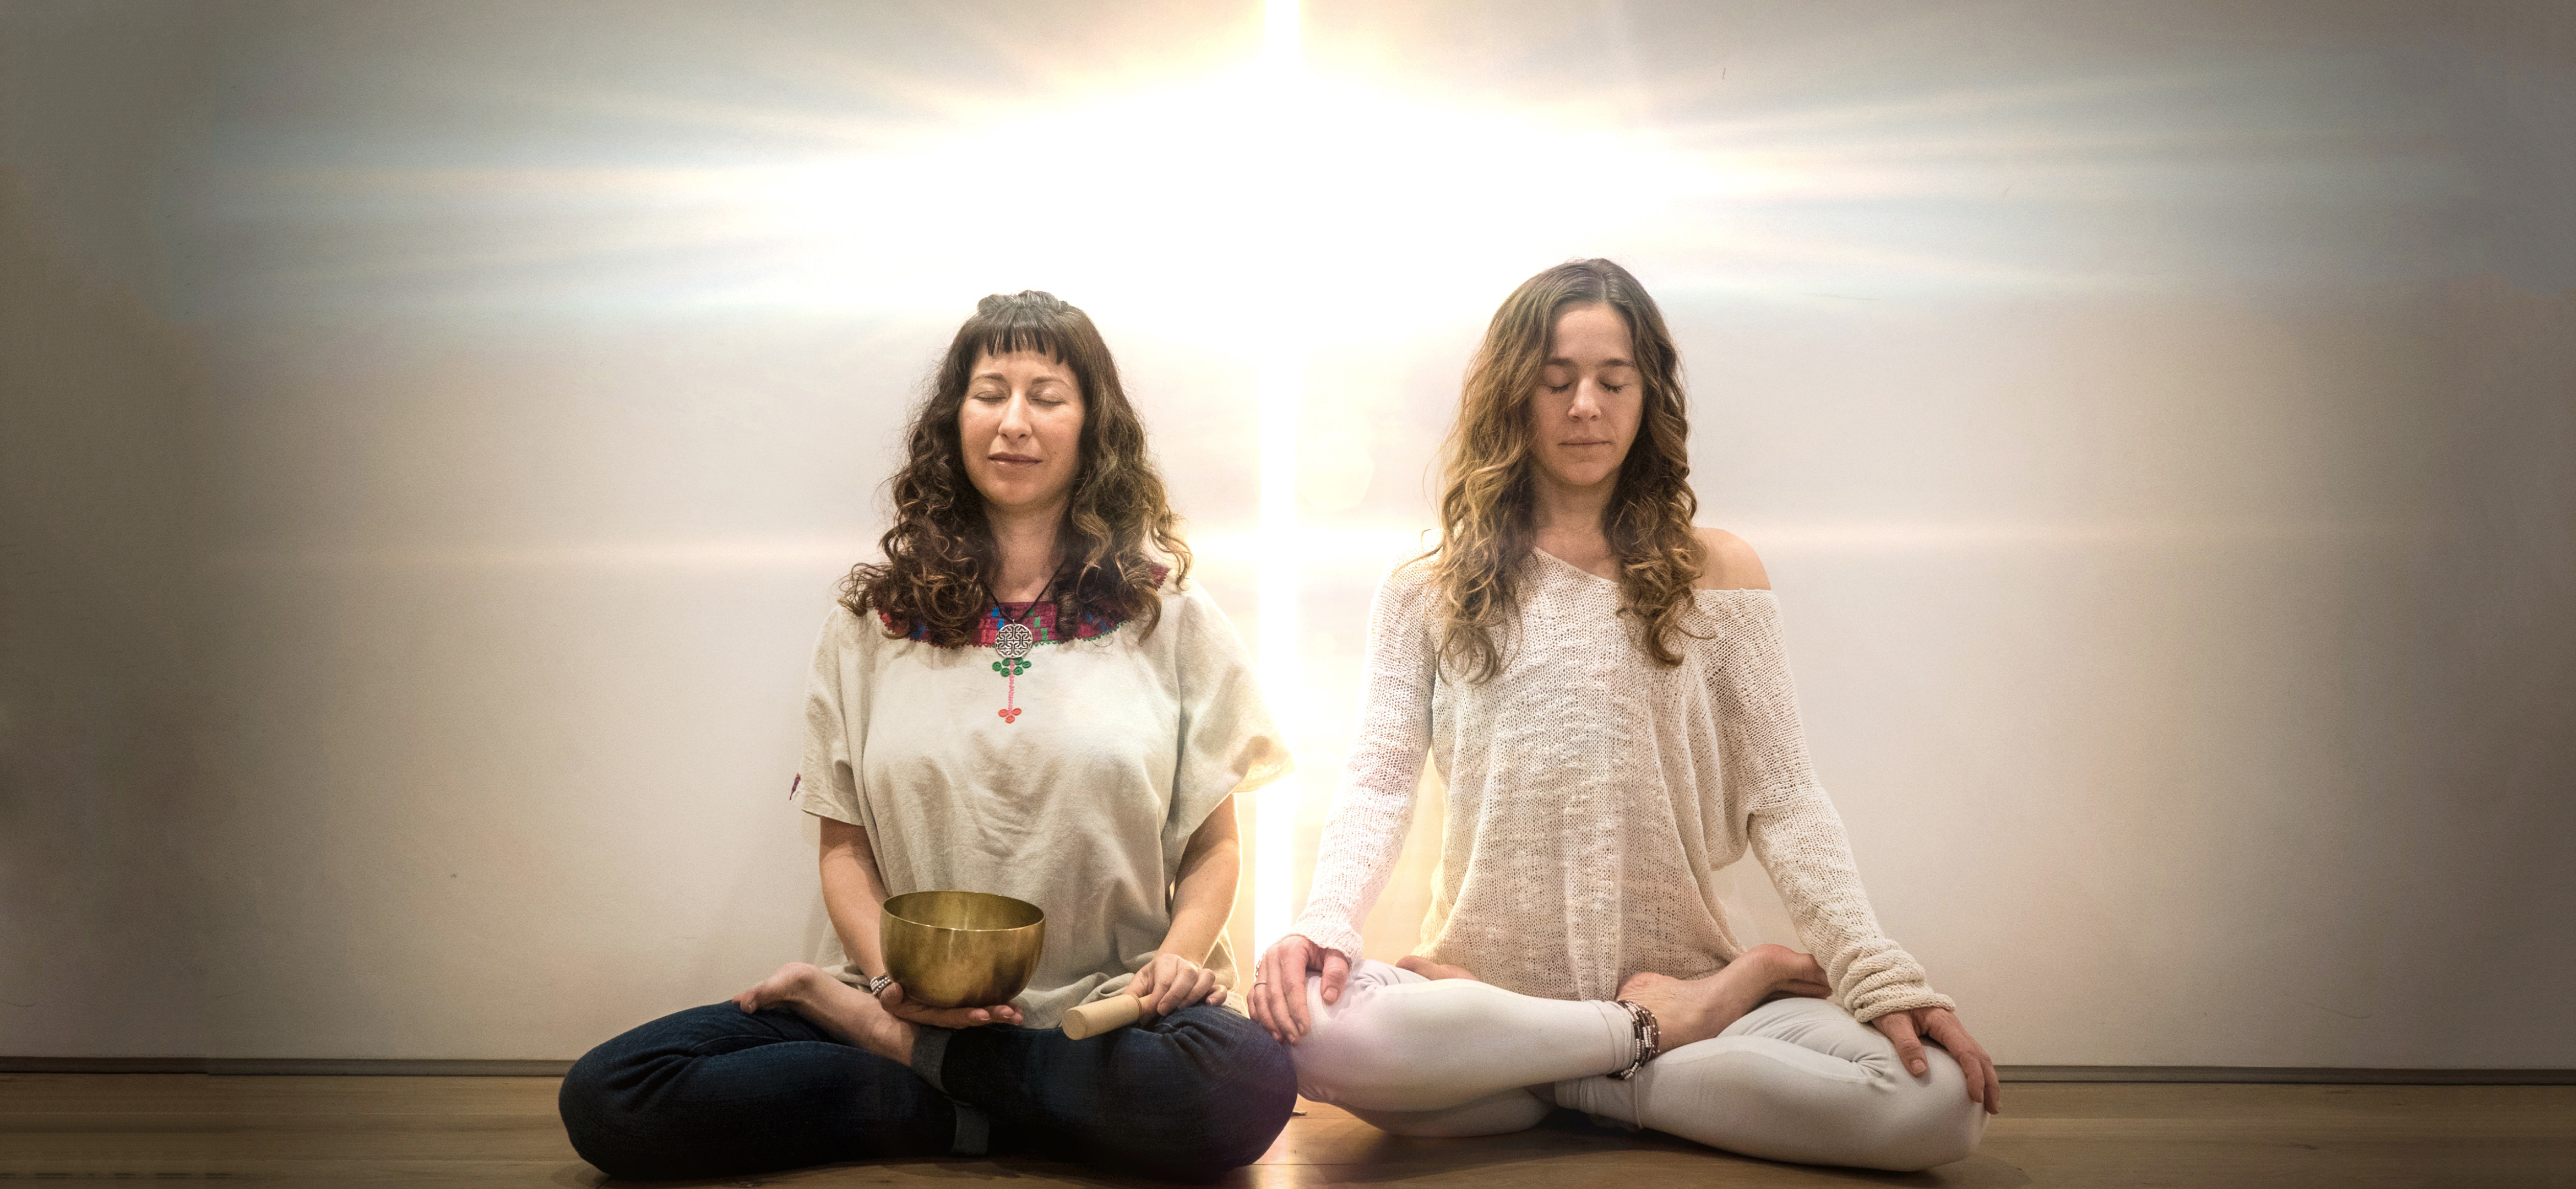 Do you see benefits in daily meditation as a psychological hack? 5